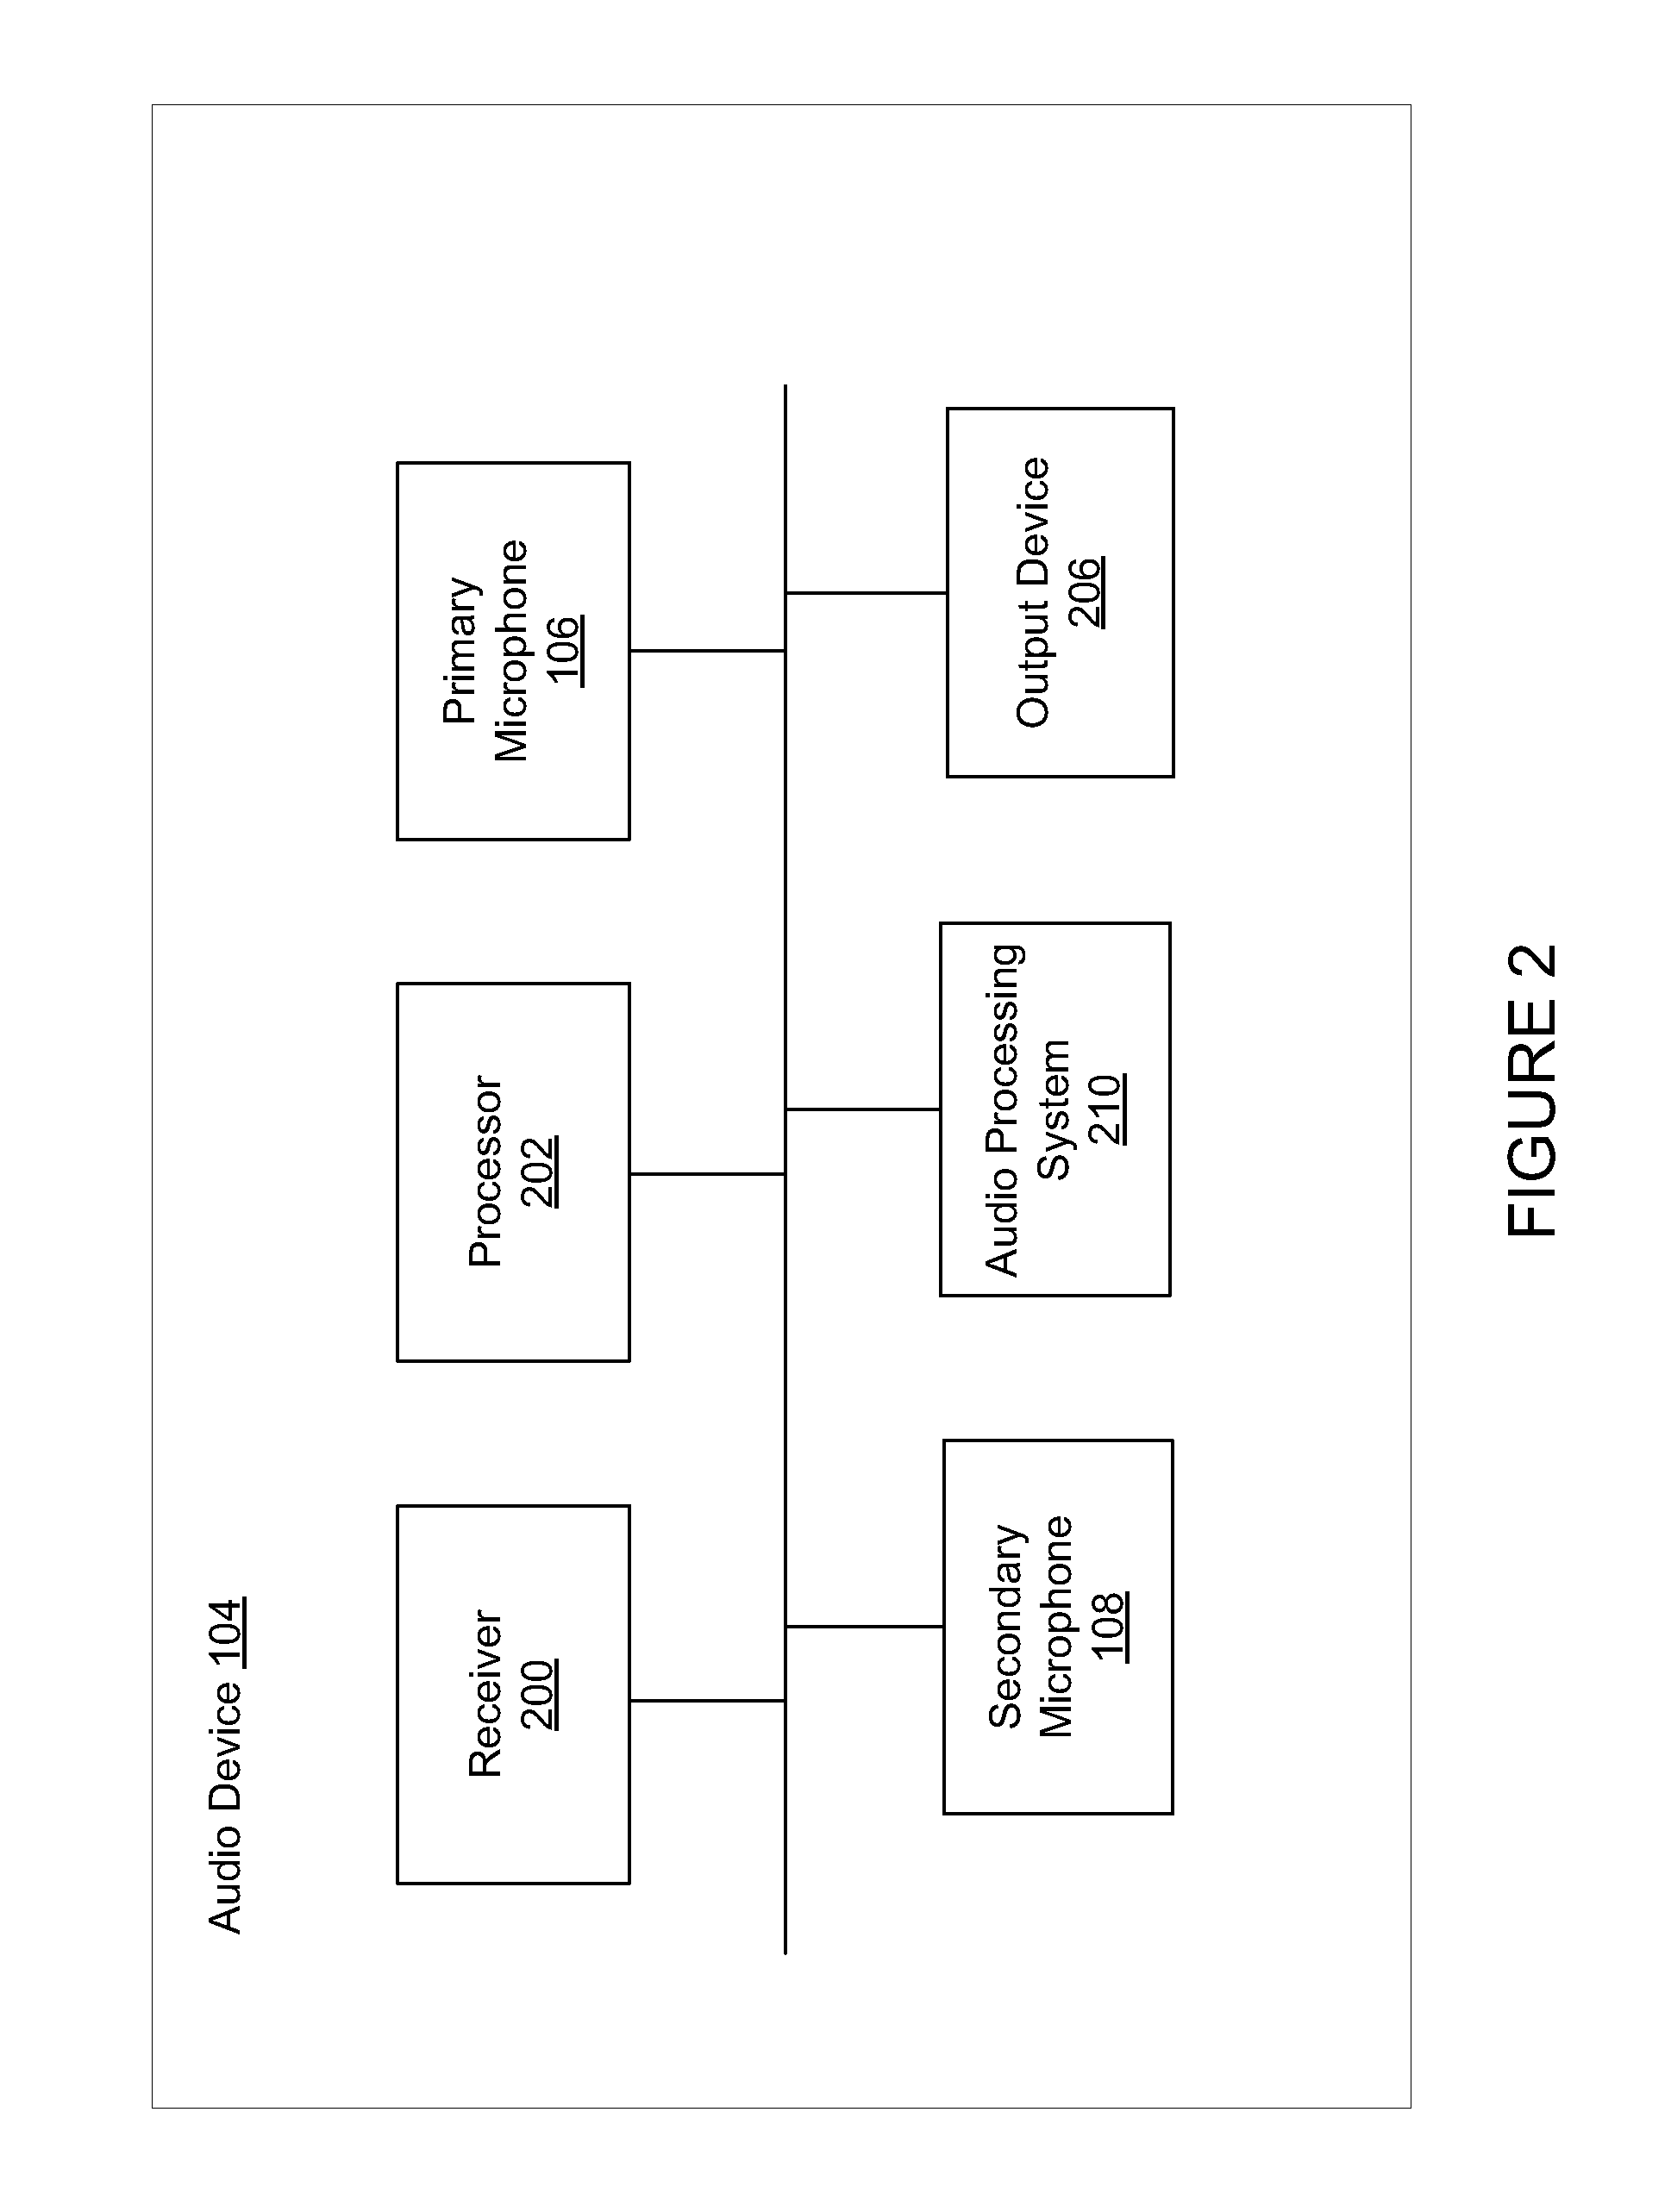 Multi-Microphone Robust Noise Suppression